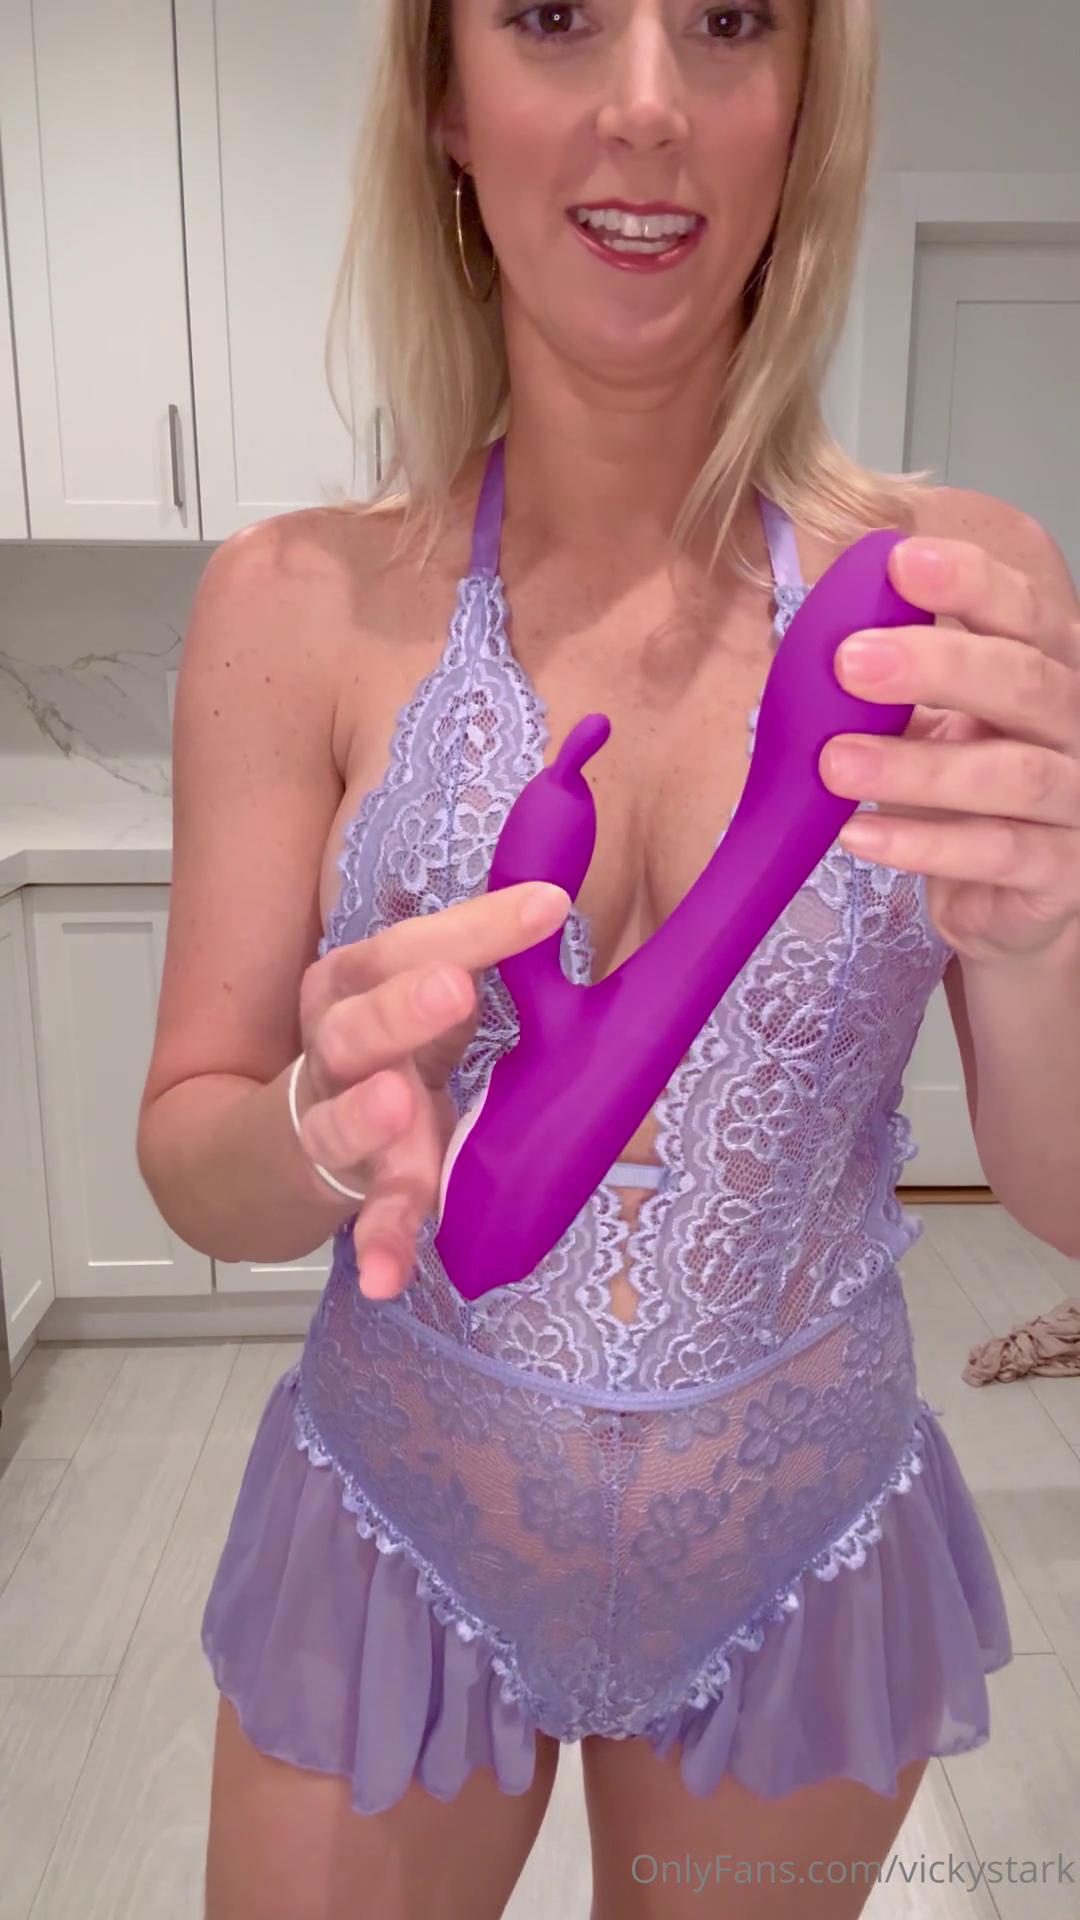 vicky stark nude matching vibrator outfits onlyfans video leaked qumwwl 1 1